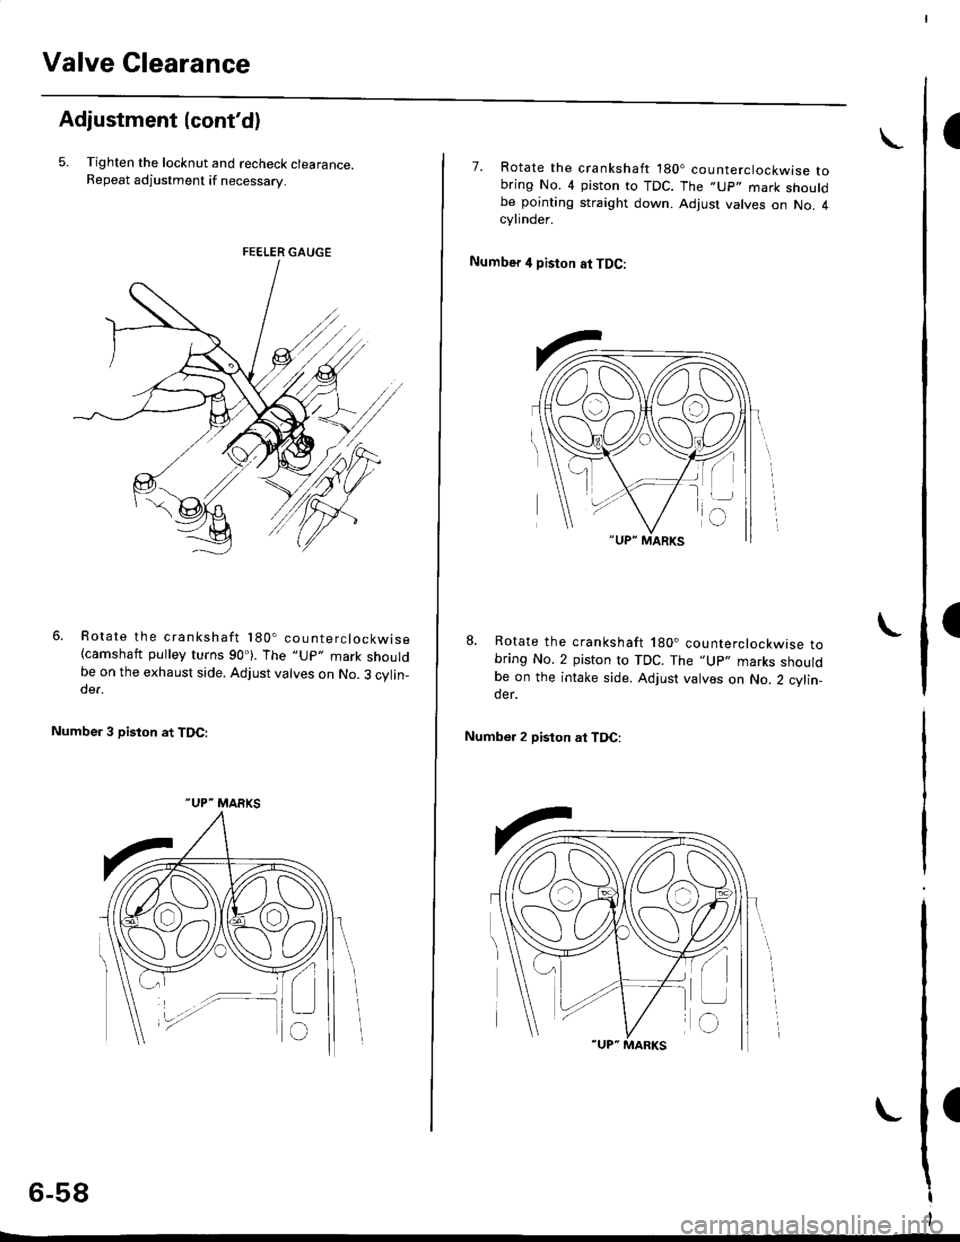 HONDA CIVIC 1998 6.G User Guide Valve Clearance
I
I
I
Adjustment {contd)
5. Tighten the locknut and recheck clearance.Repeat adjustment if necessary.
Rotate the crankshaft 180. counterclockwise(camshaft pulley turns 90). The "Up" 